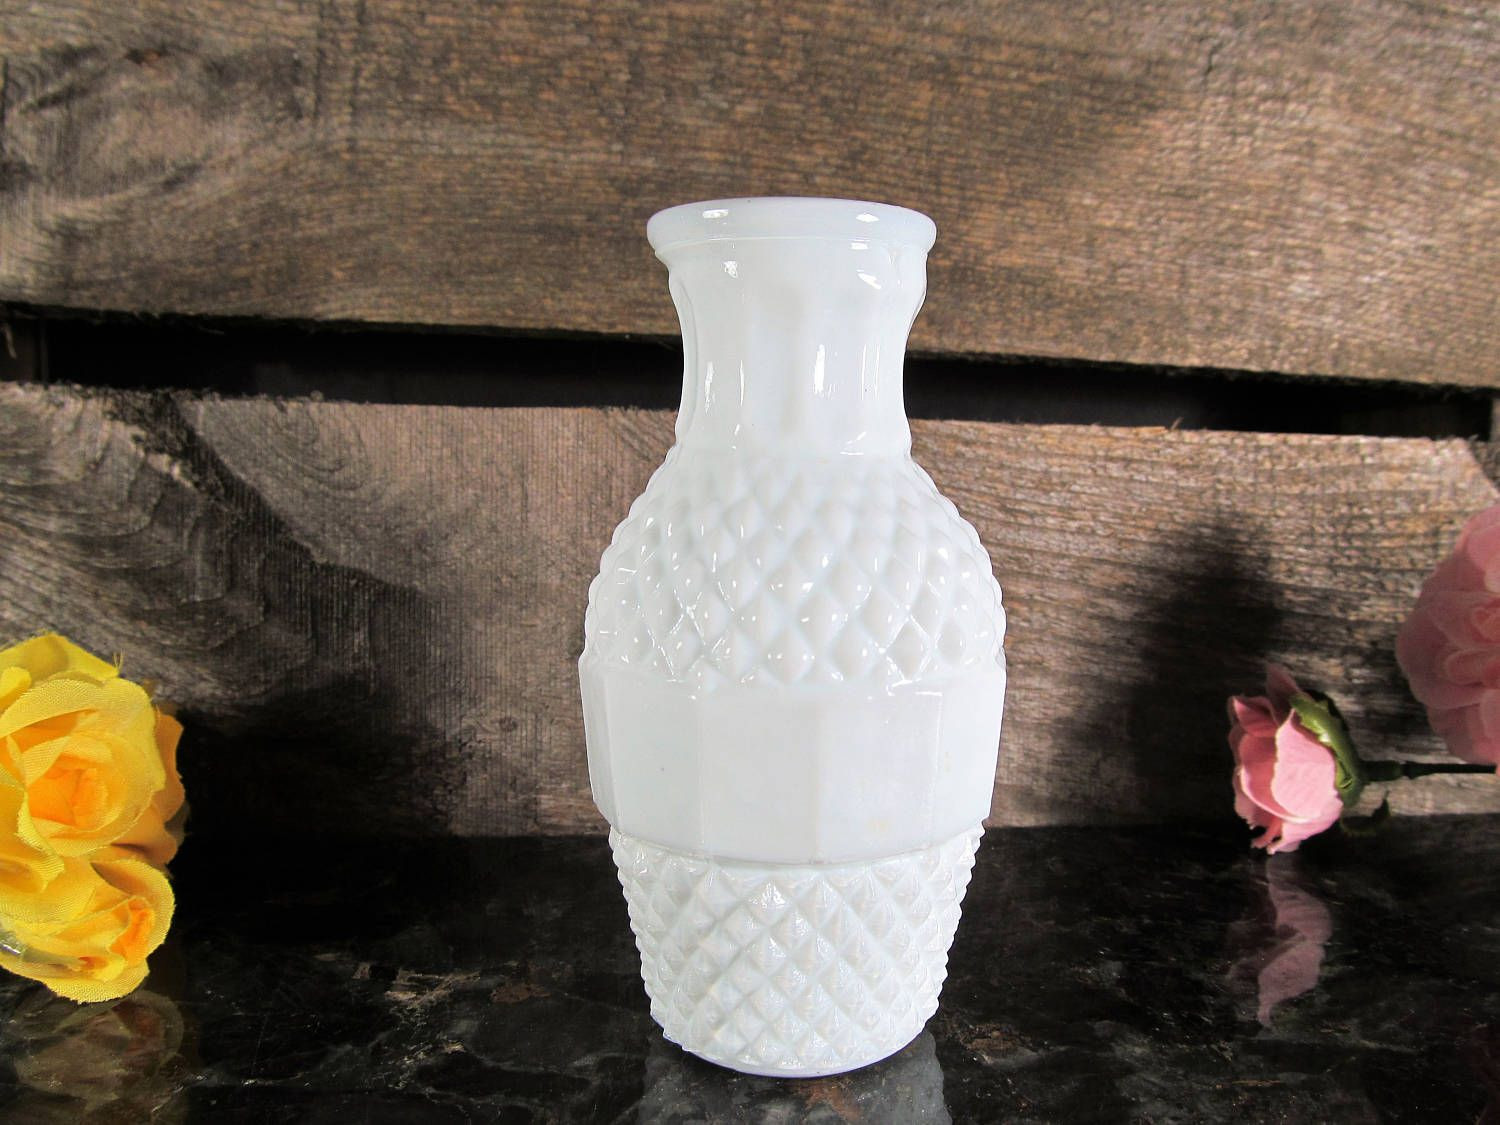 28 Spectacular Cheap Small Glass Bud Vases 2024 free download cheap small glass bud vases of small white milk glass bud vase miniature floral vase retro home intended for small white milk glass bud vase miniature floral vase retro home and office decor